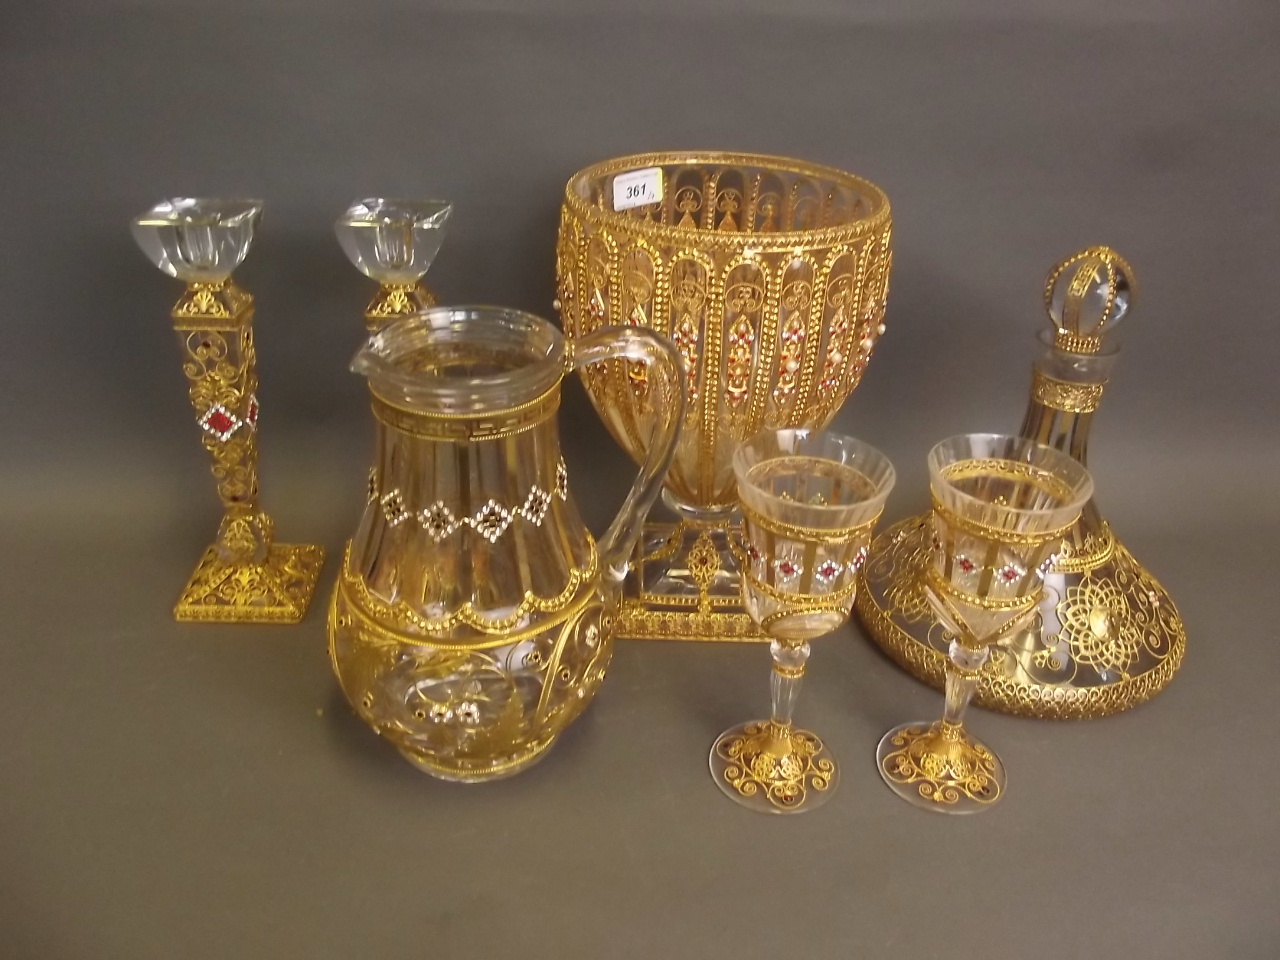 A superb suite of Isnik design silver gilt overlaid glassware, set with rubies and pearls, to